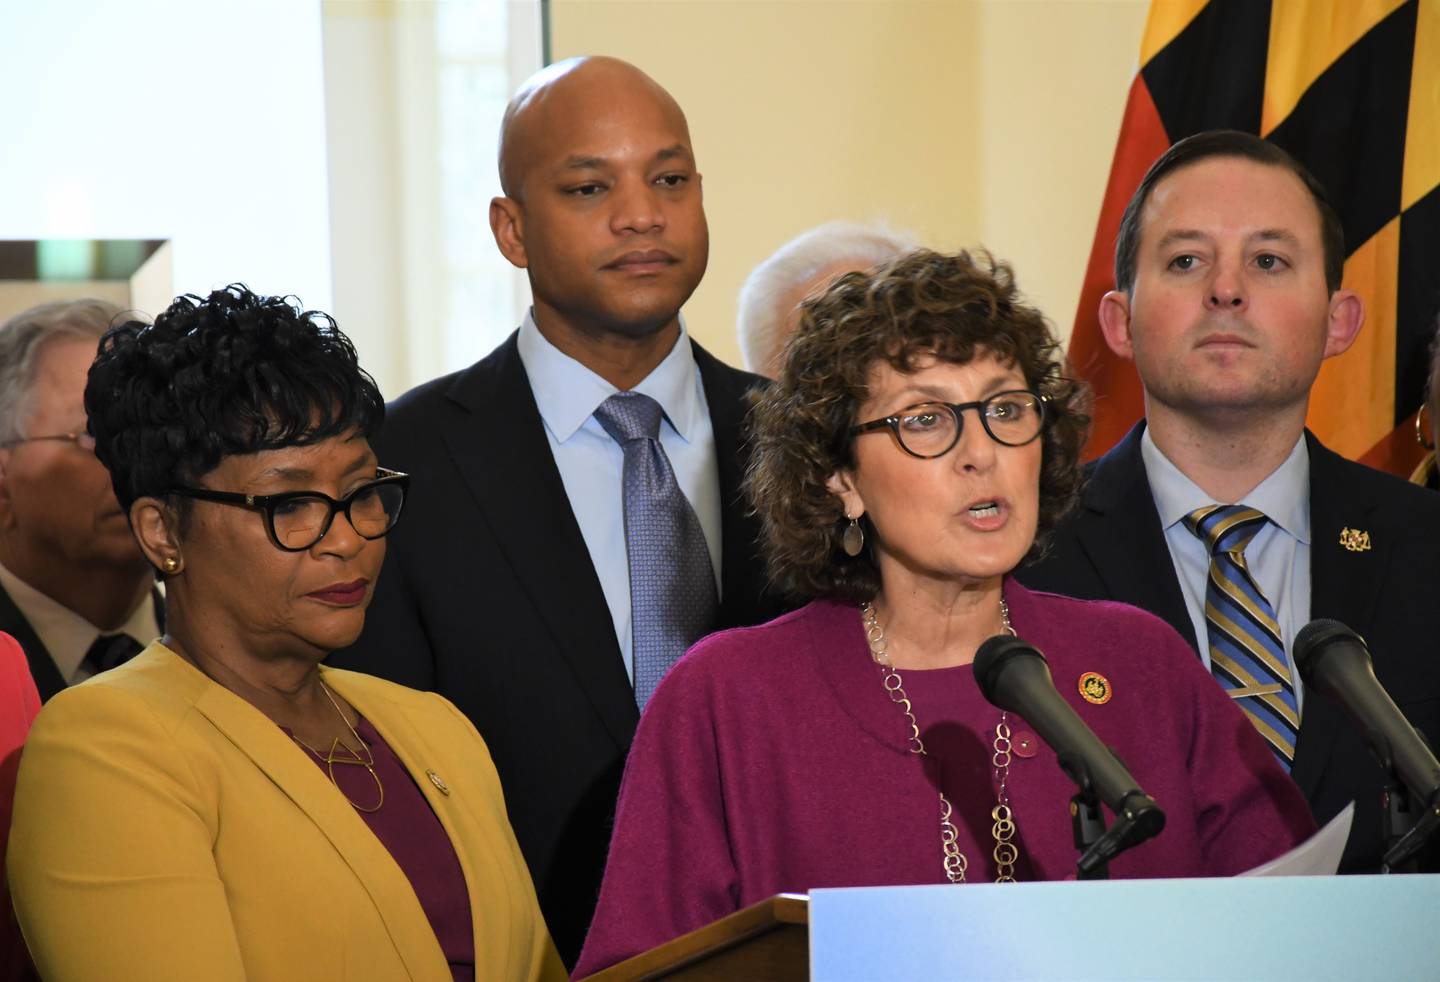 Sen. Shelly Hettleman talks about proposals to protect access to abortion during a press conference at the State House in Annapolis on Thursday, Feb. 9, 2023. She's joined by other leaders including House of Delegates Speaker Adrienne A. Jones, Gov. Wes Moore and Senate President Bill Ferguson.